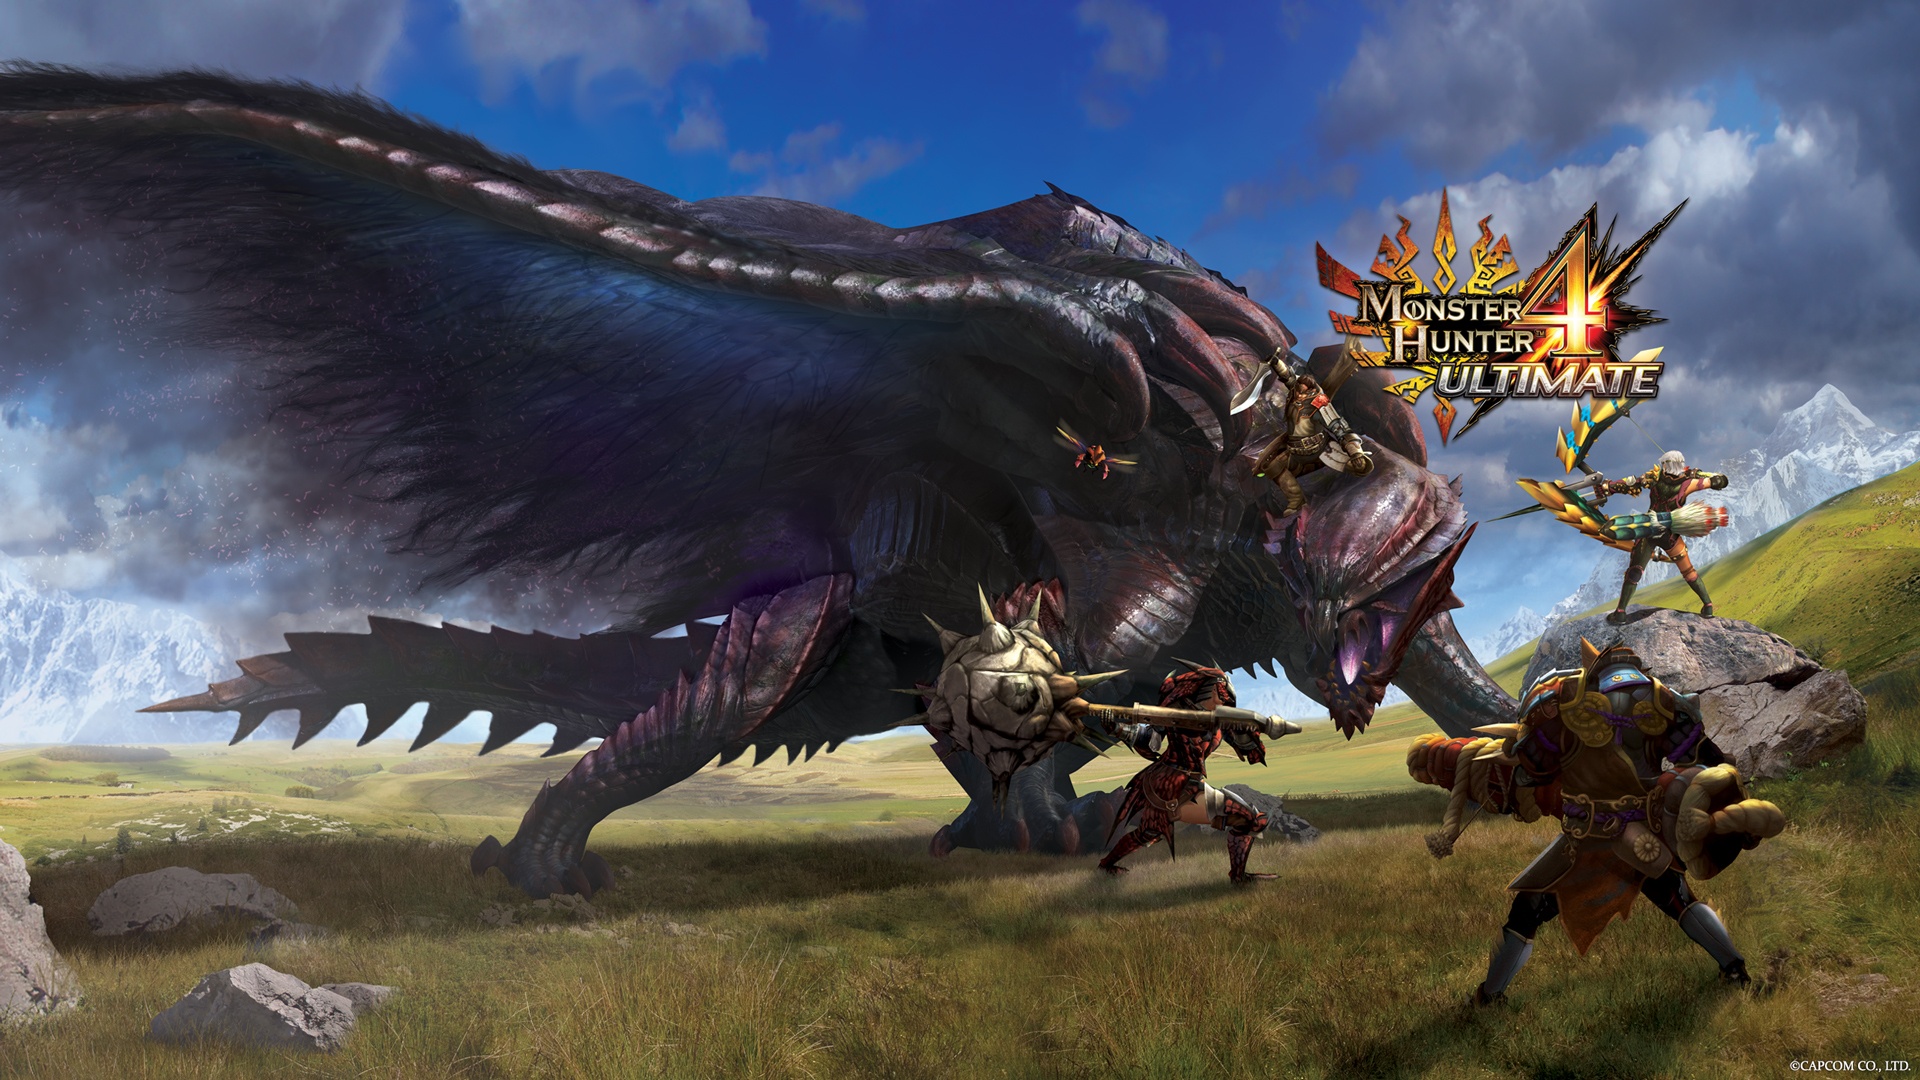 Monster Hunter 4 Pics, Video Game Collection